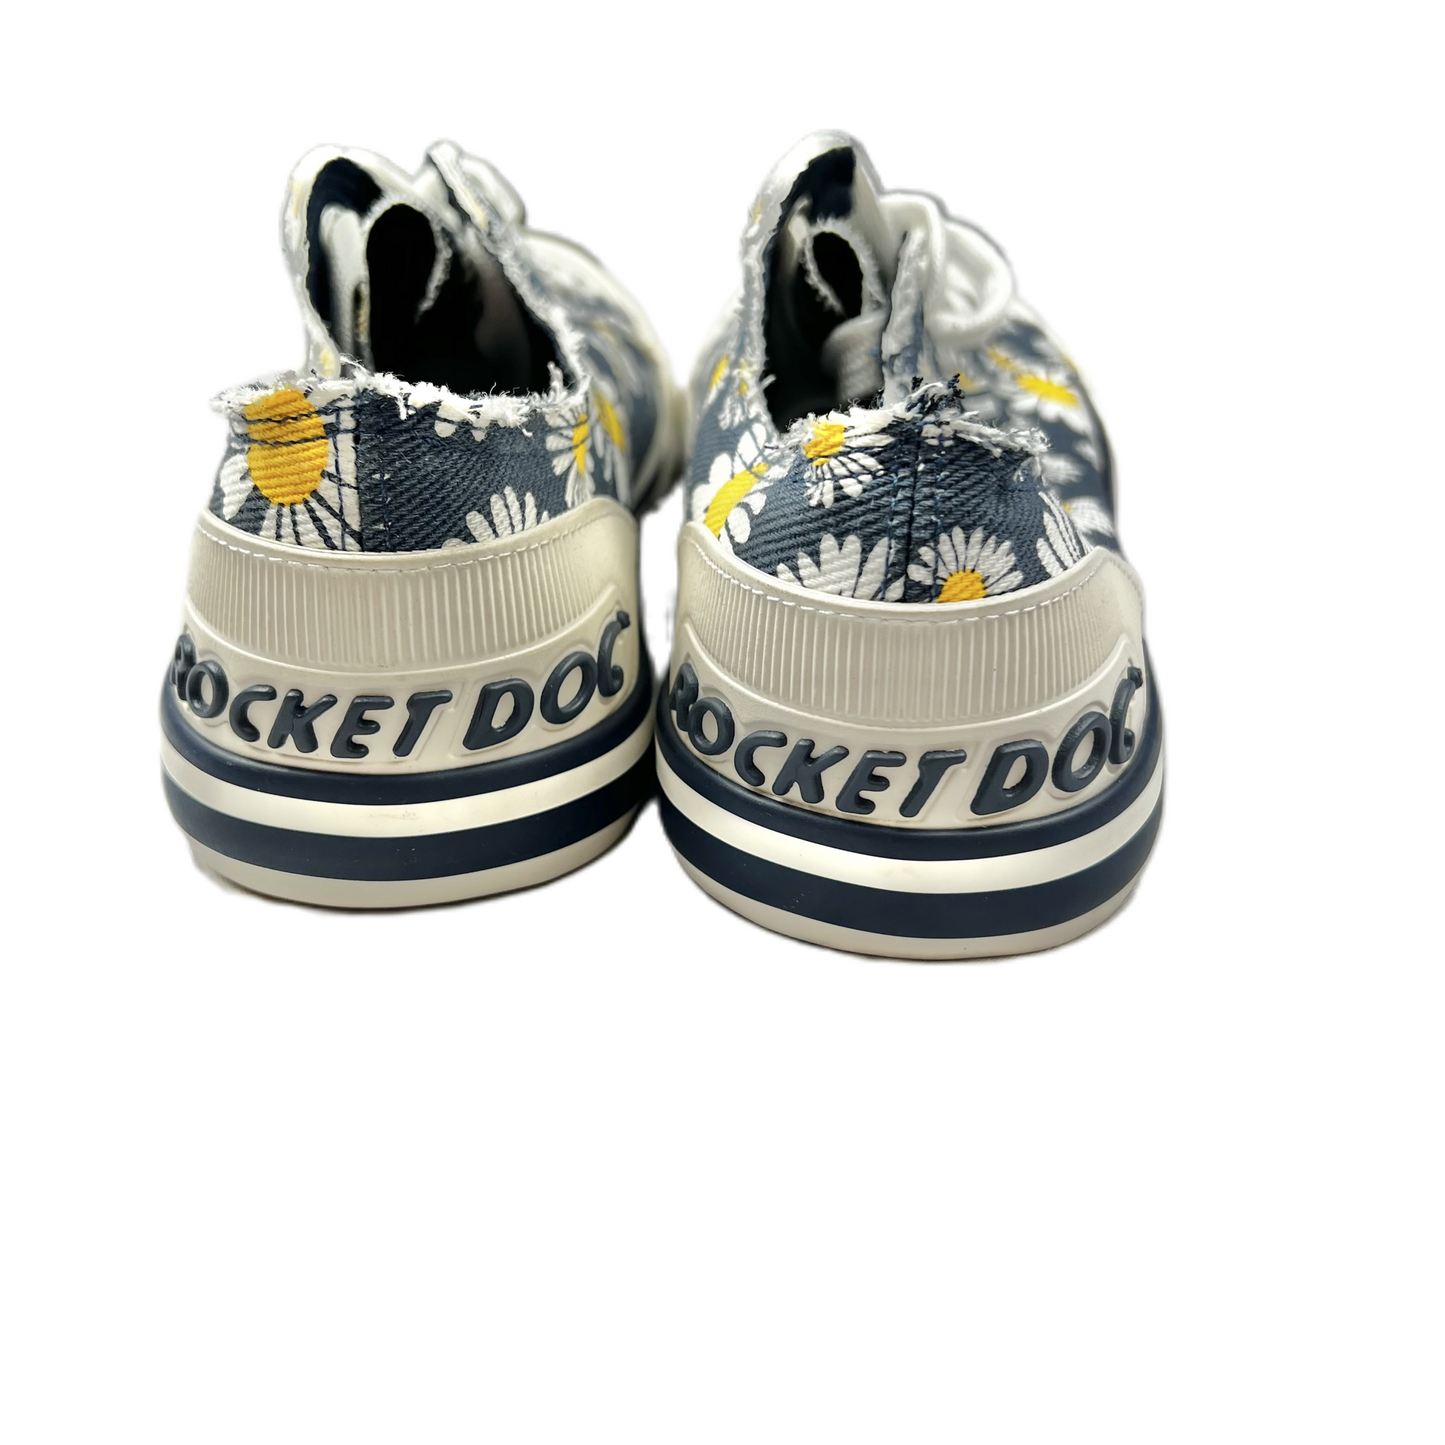 Flowered Shoes Sneakers By Rocket Dogs, Size: 8.5